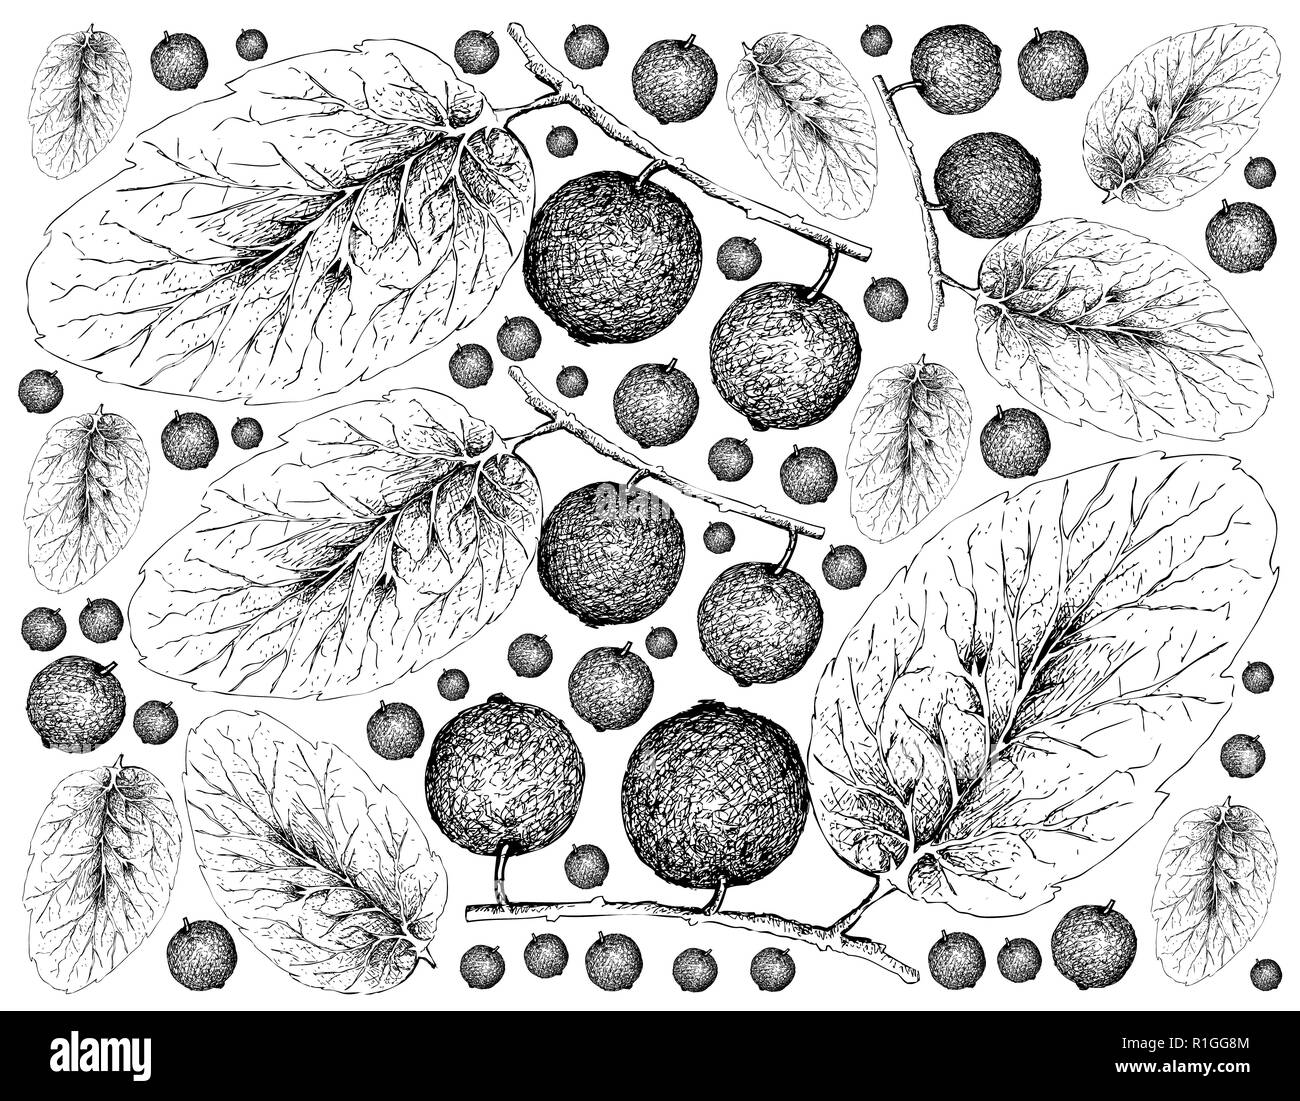 Berry Fruit, Illustration Wallpaper of Hand Drawn Sketch of Fresh Madagascar Plums or Flacourtia Indica Fruits Isolated on White Background. Stock Photo